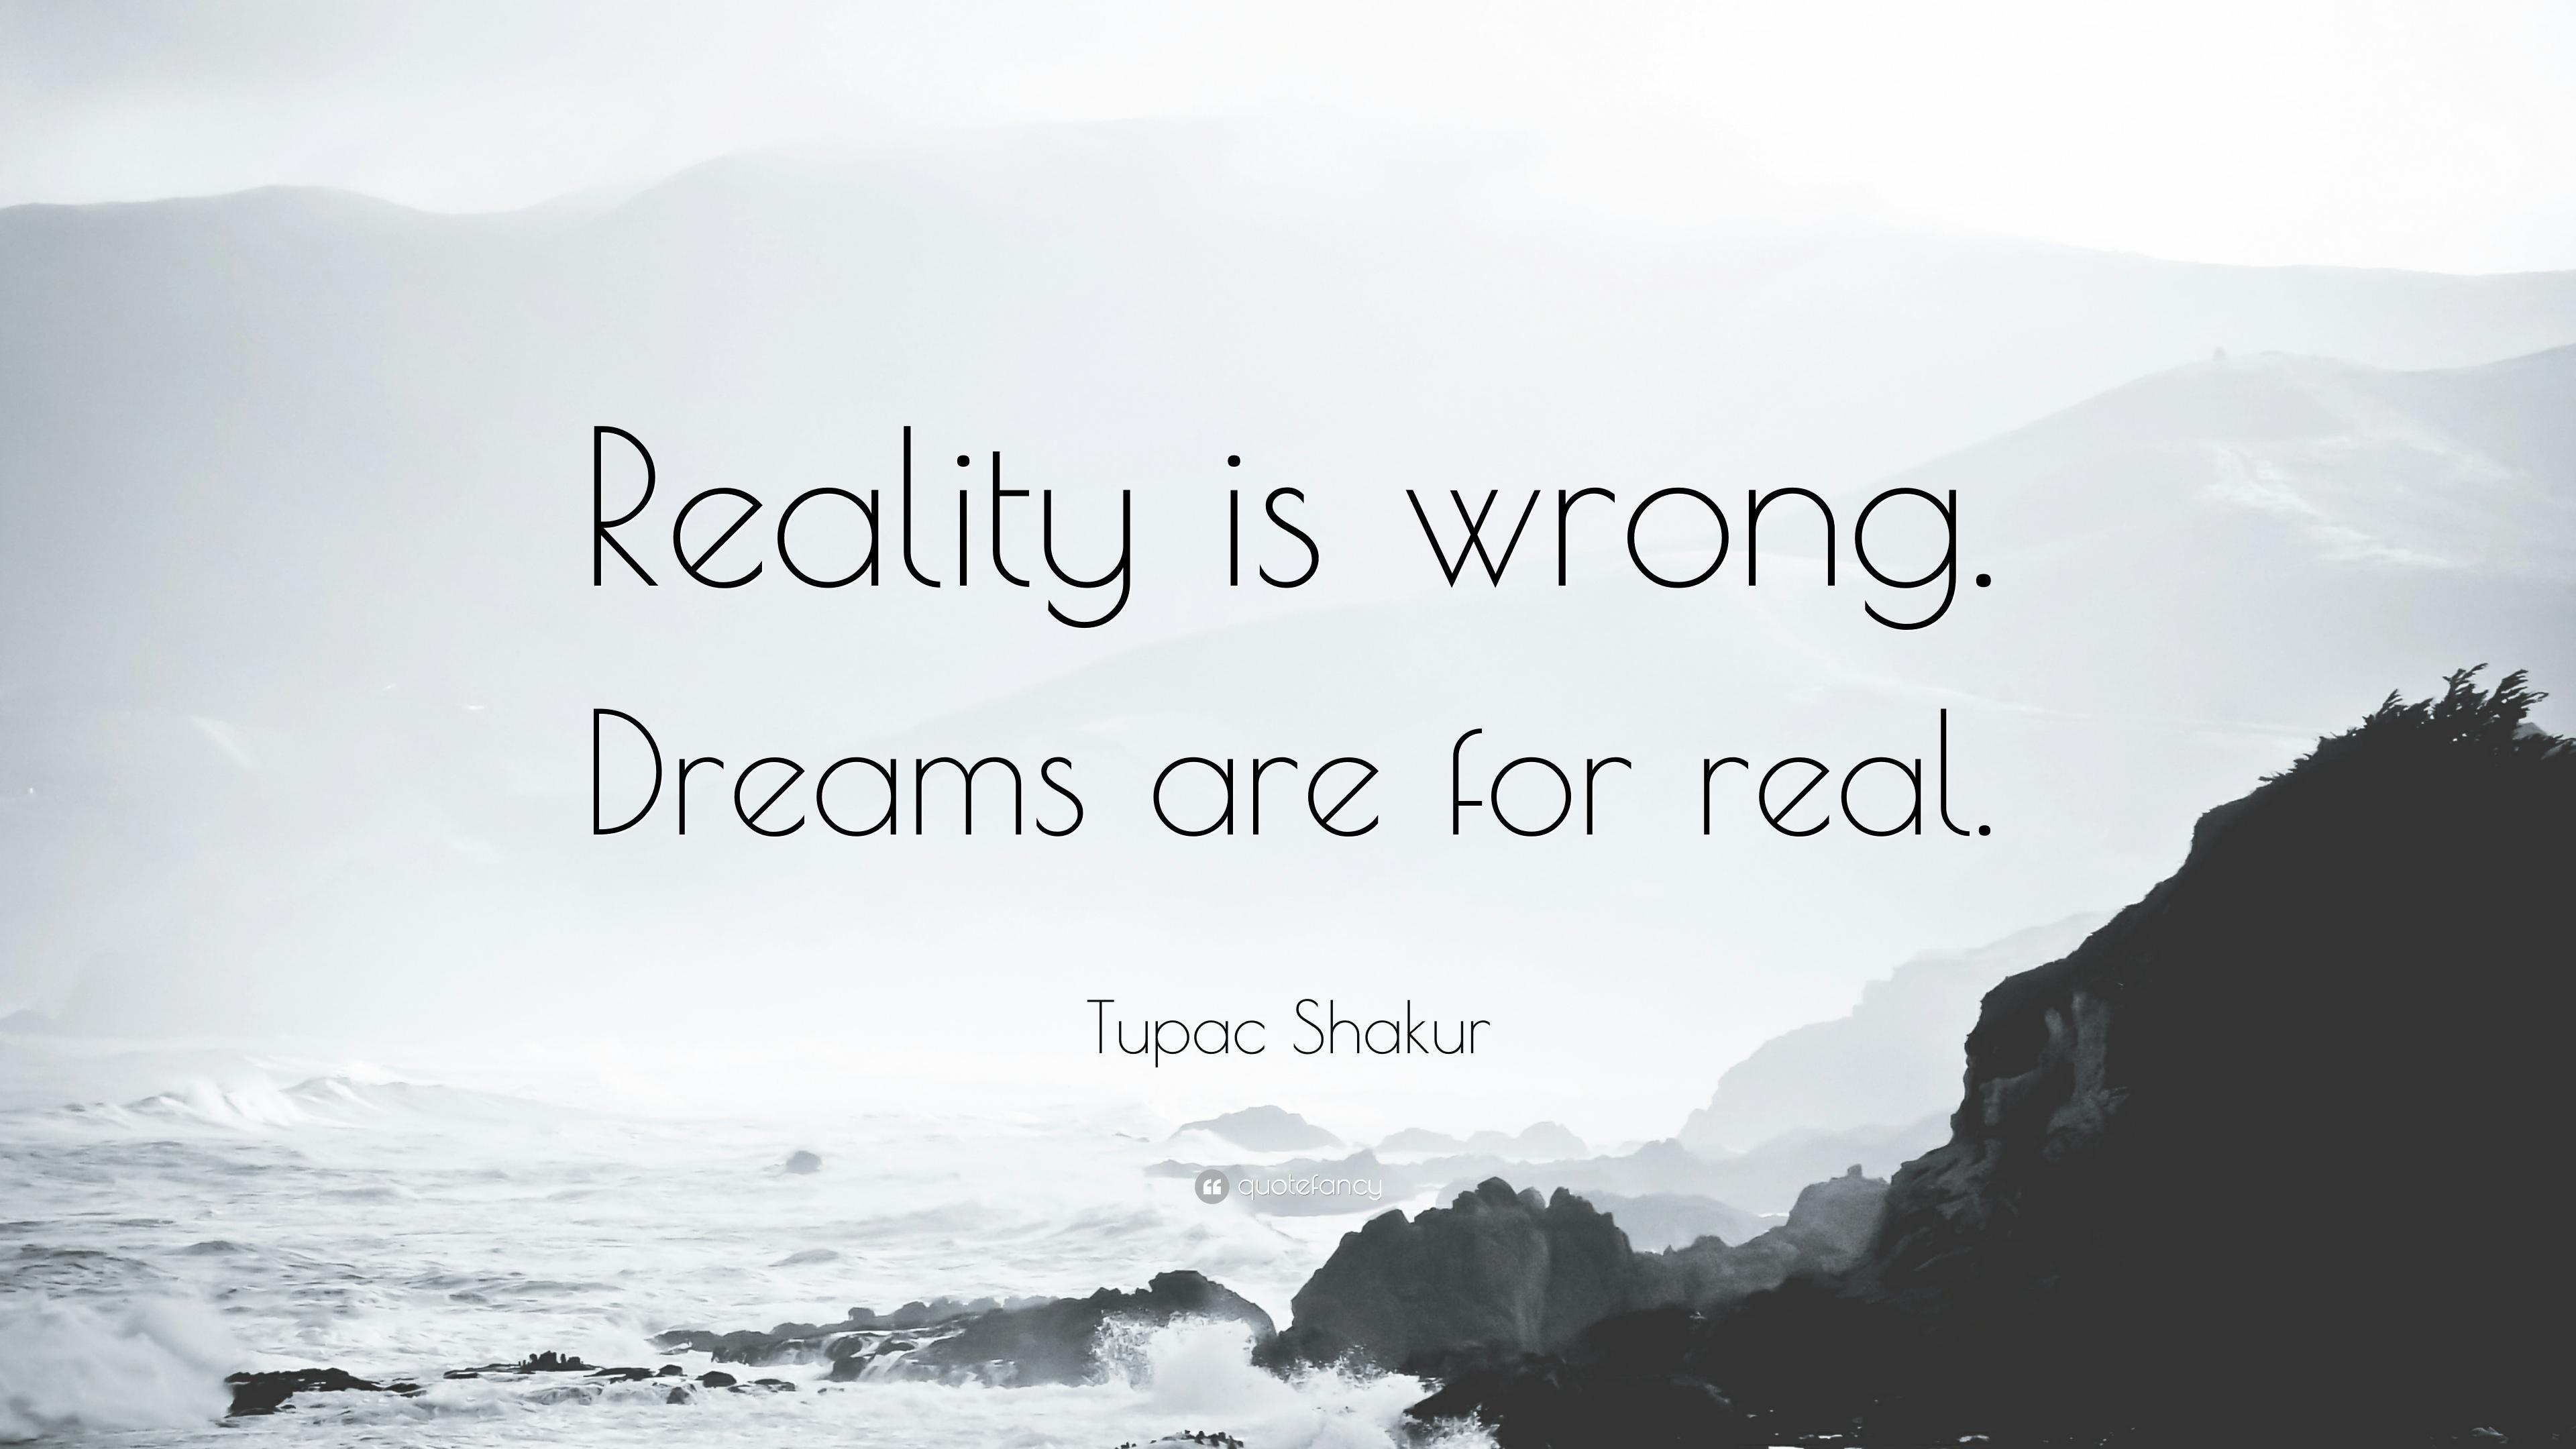 Tupac Shakur Quote: “Reality is wrong. Dreams are for real